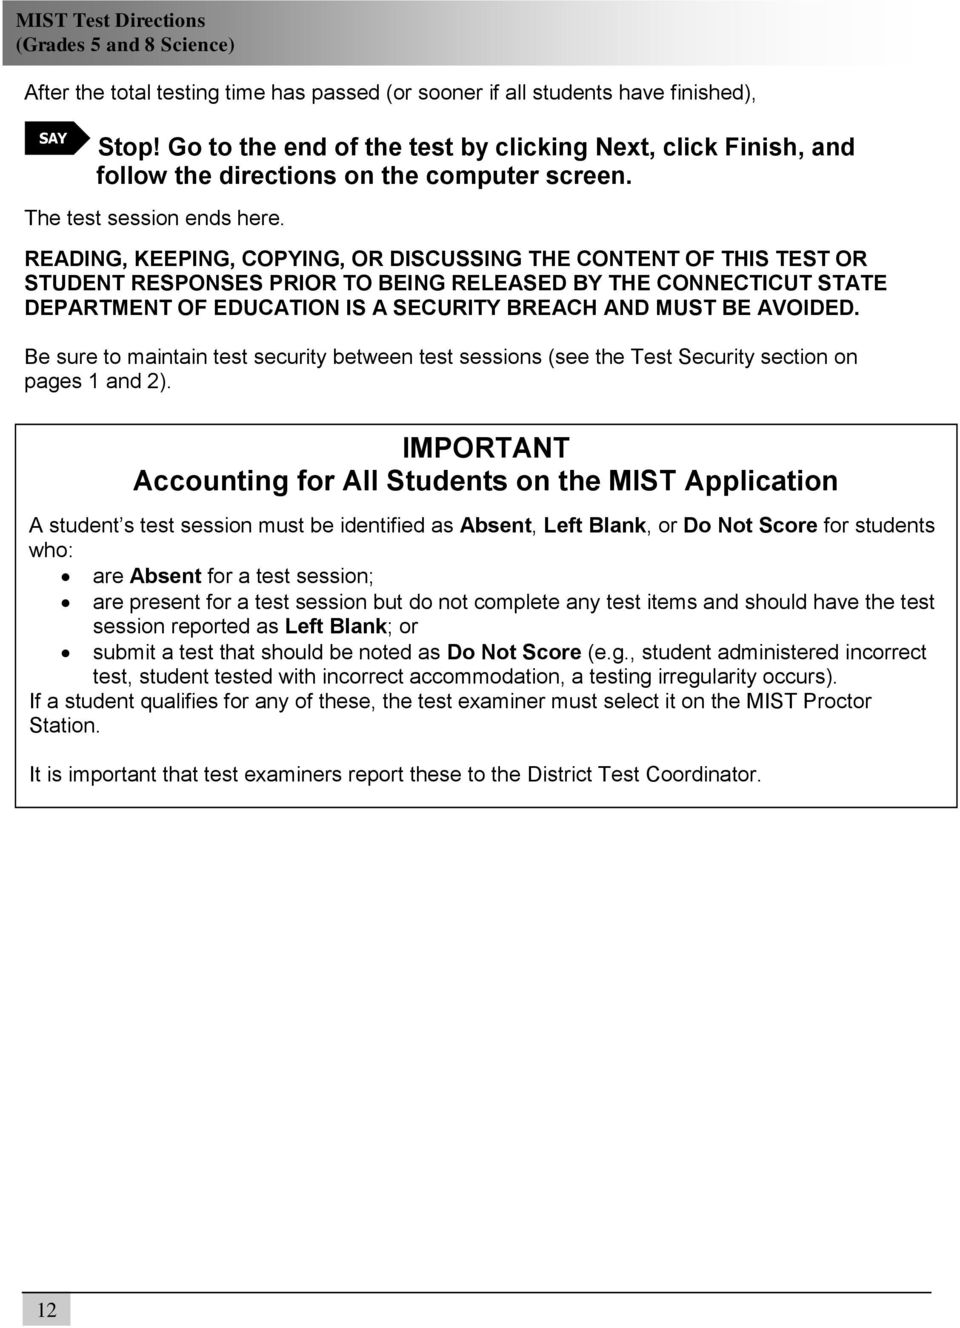 READING, KEEPING, COPYING, OR DISCUSSING THE CONTENT OF THIS TEST OR STUDENT RESPONSES PRIOR TO BEING RELEASED BY THE CONNECTICUT STATE DEPARTMENT OF EDUCATION IS A SECURITY BREACH AND MUST BE